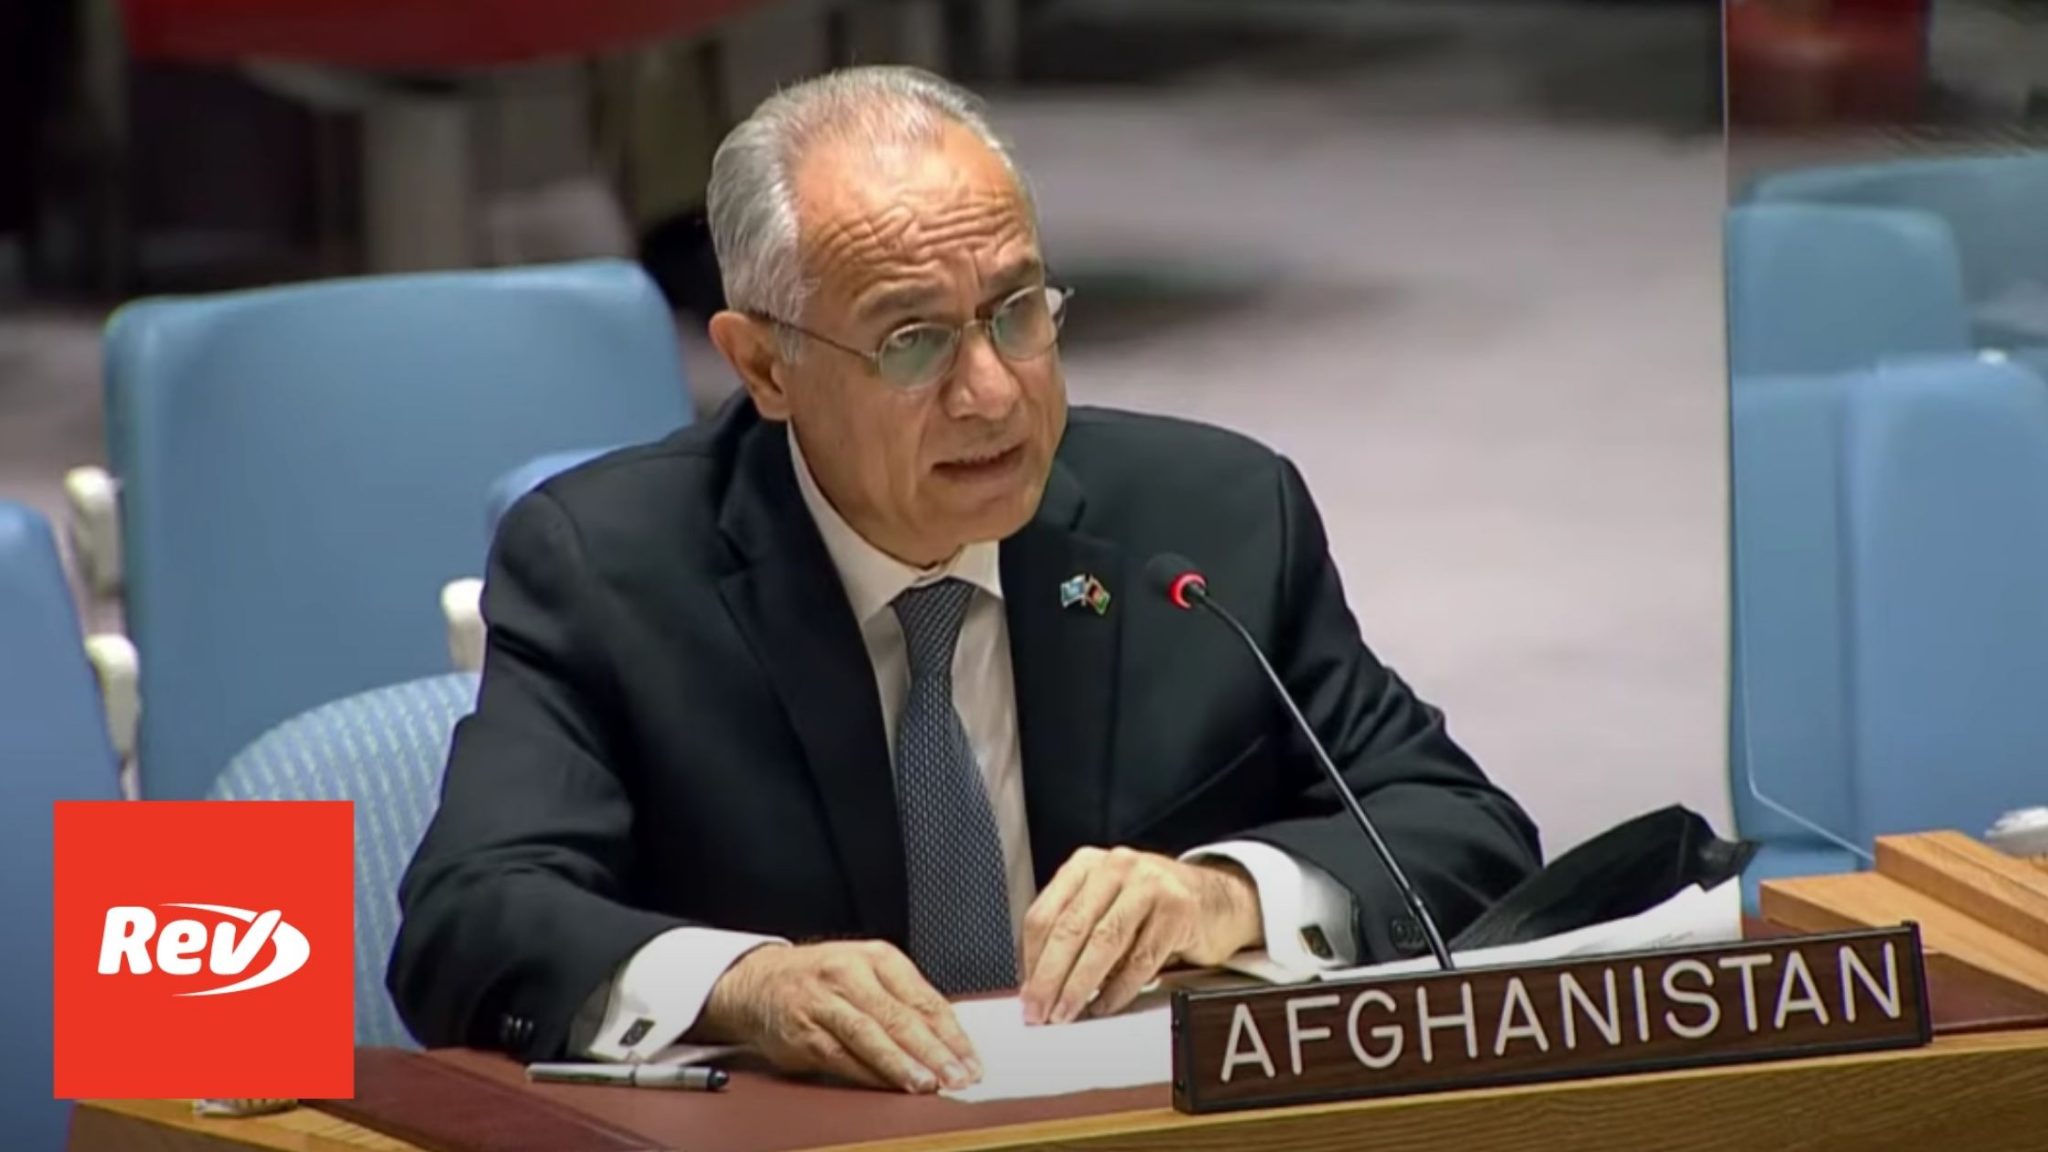 UN Security Council Meeting on Afghanistan Transcript August 16